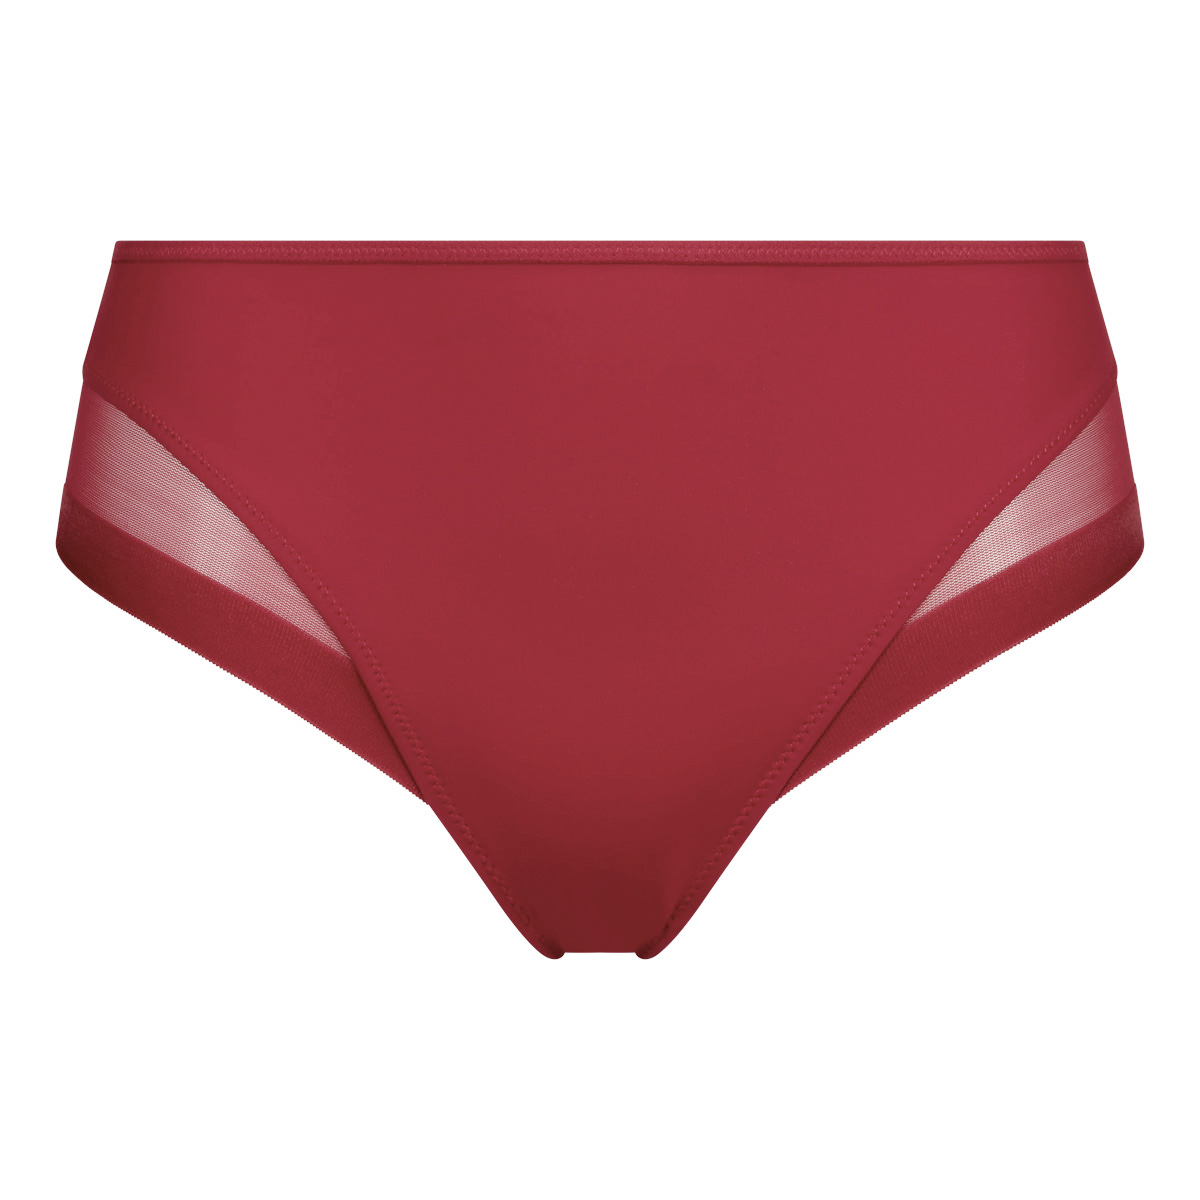 Generous Embroidered Red Women's knickers in microfibre in floral